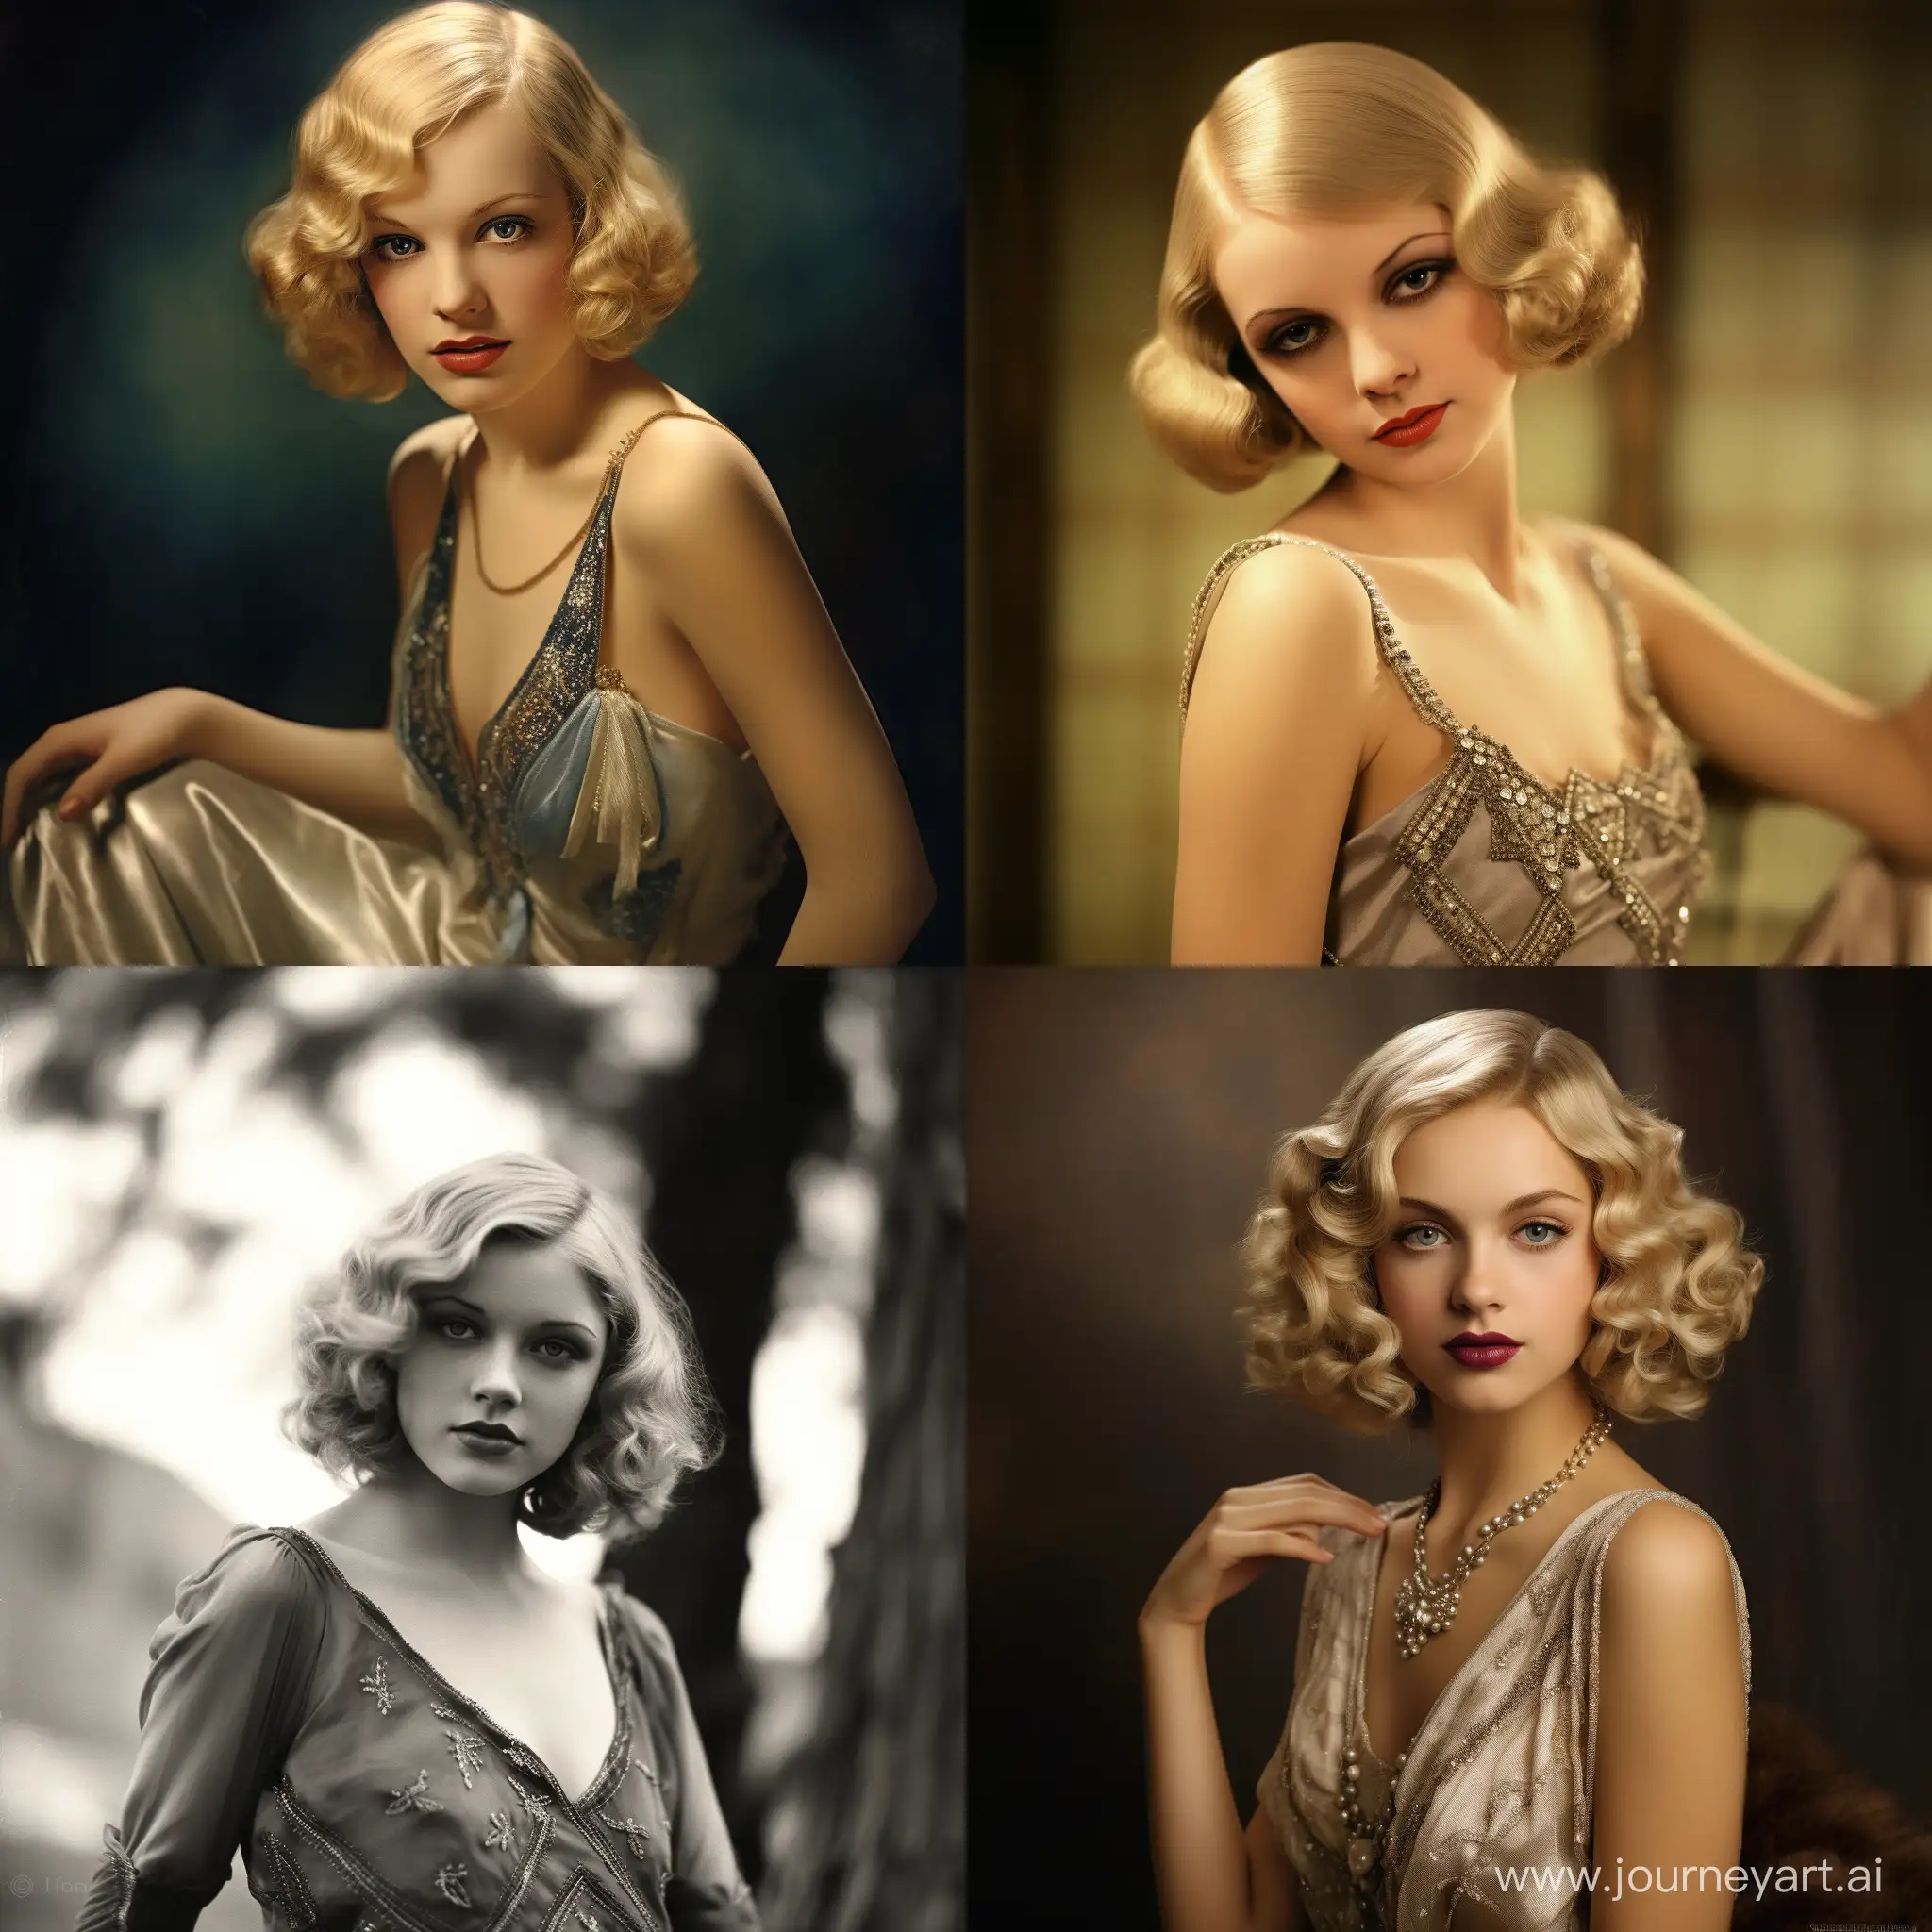  A petite 25-year-old blonde girl with light brown eyes, an actress from the 1920s. Narny style, America 1920s.